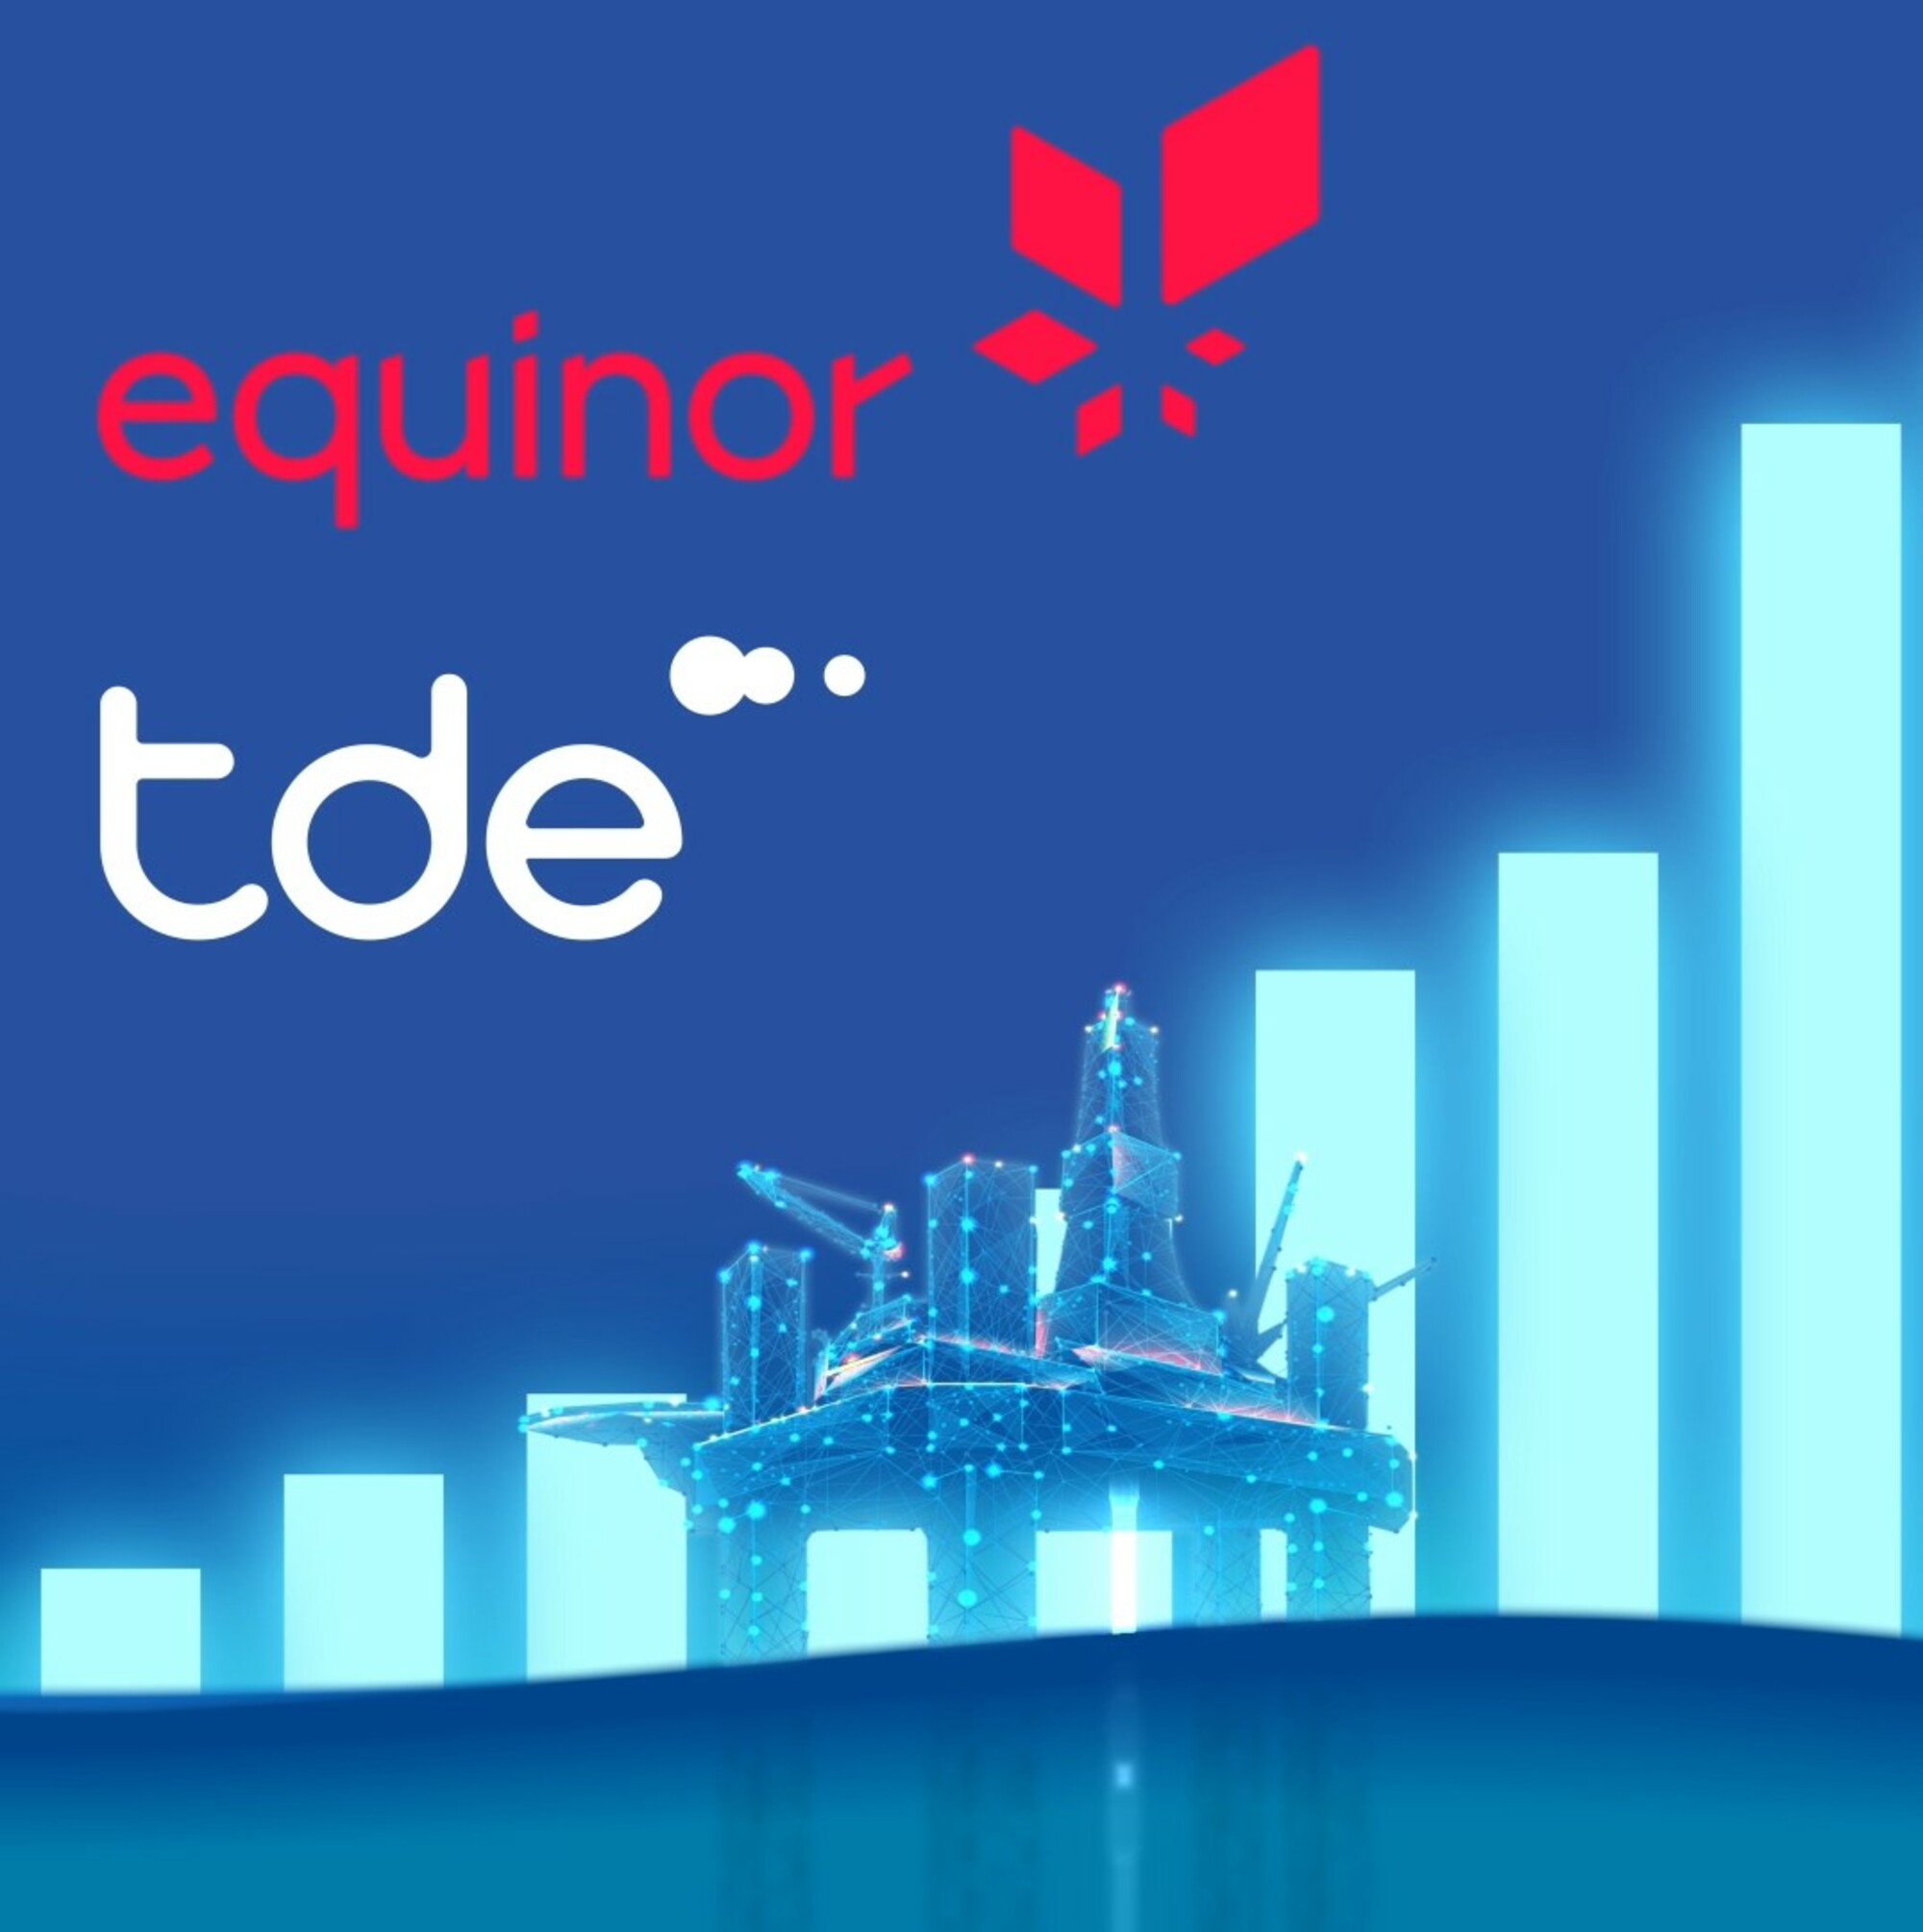 tde and Equinor contract extension